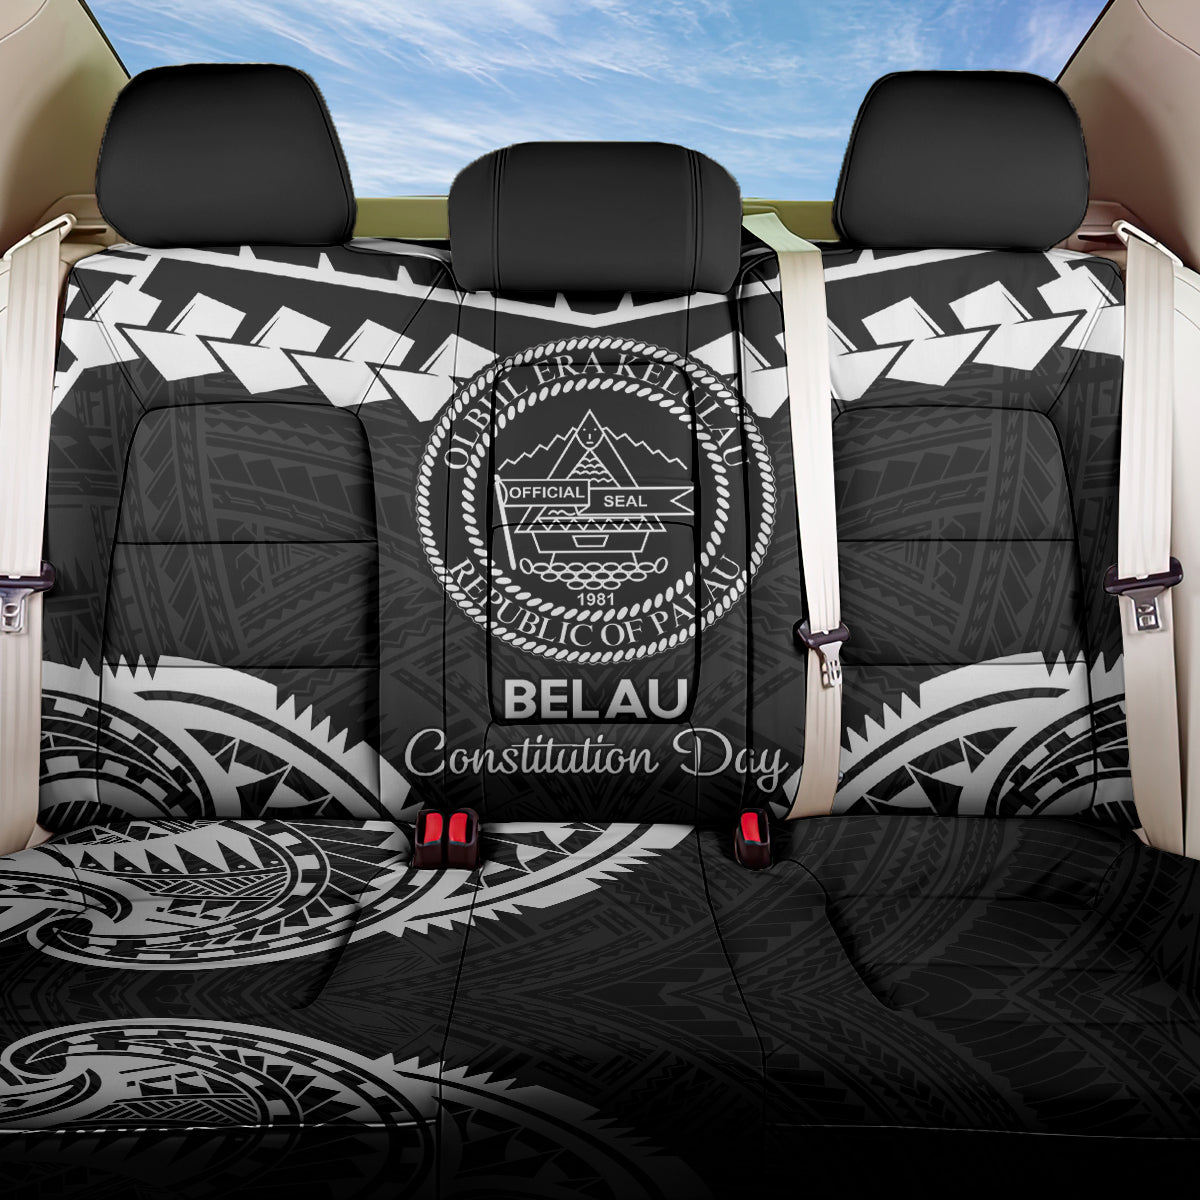 Palau Constitution Day Back Car Seat Cover Belau Seal With Polynesian Pattern - Black